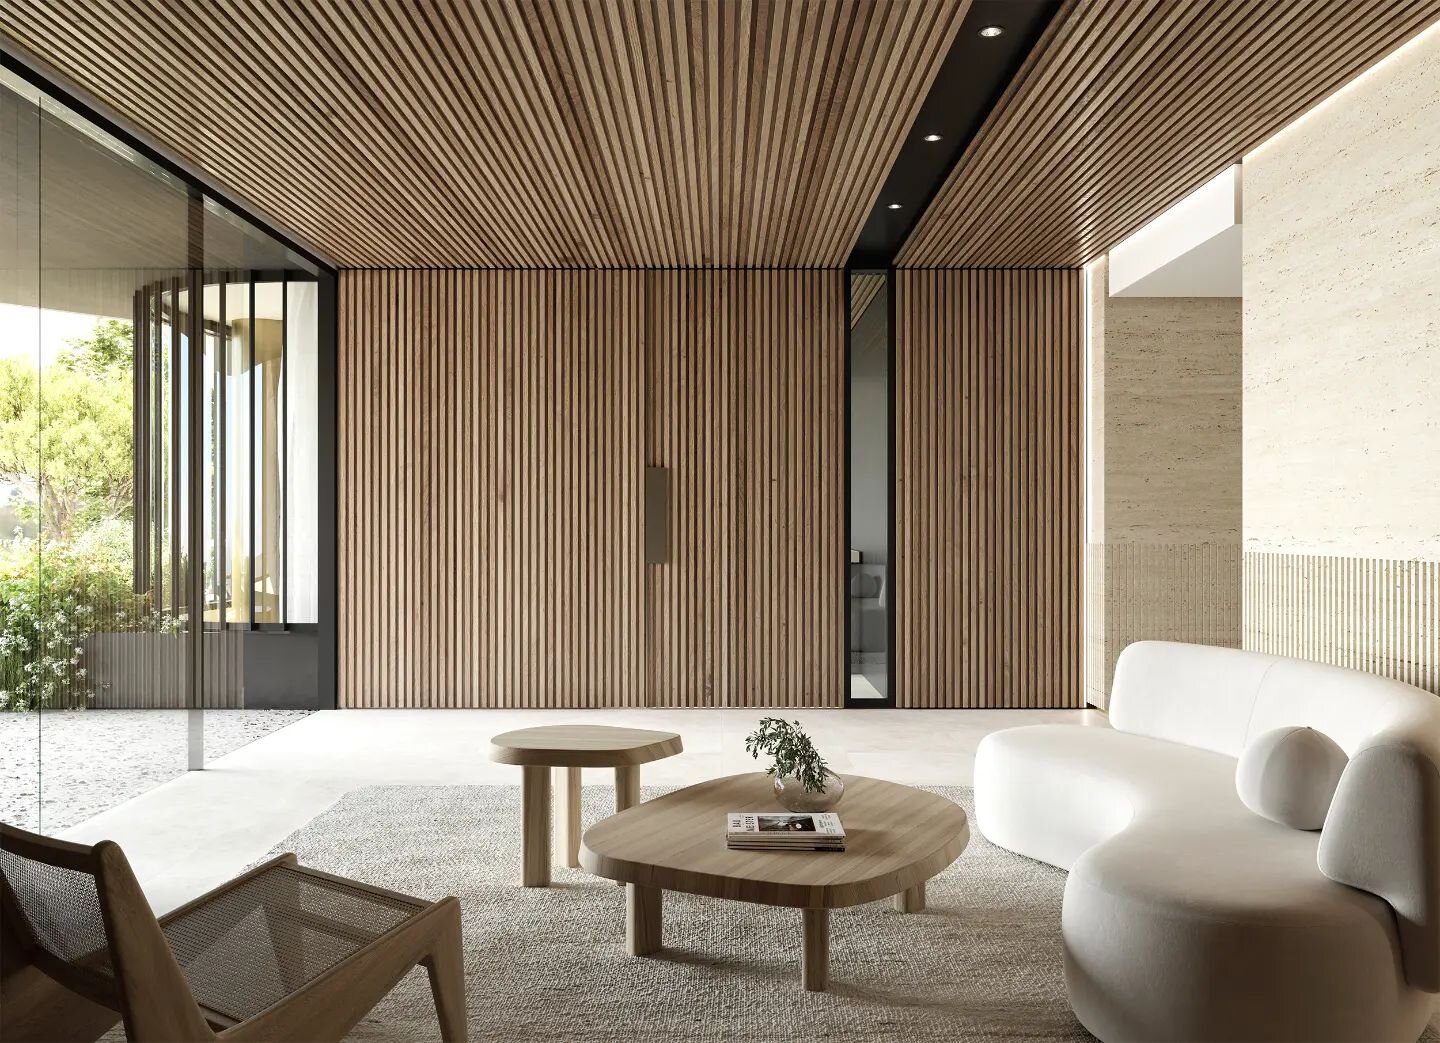 Designed to exude warmth and create a sense of arrival, the For&egrave;t Nedlands lobby features a paletteofwarm timber and marble finishes.

Project launching soon and starting construction later this year.

@radarchitectureaus
@jonesrealty_projects